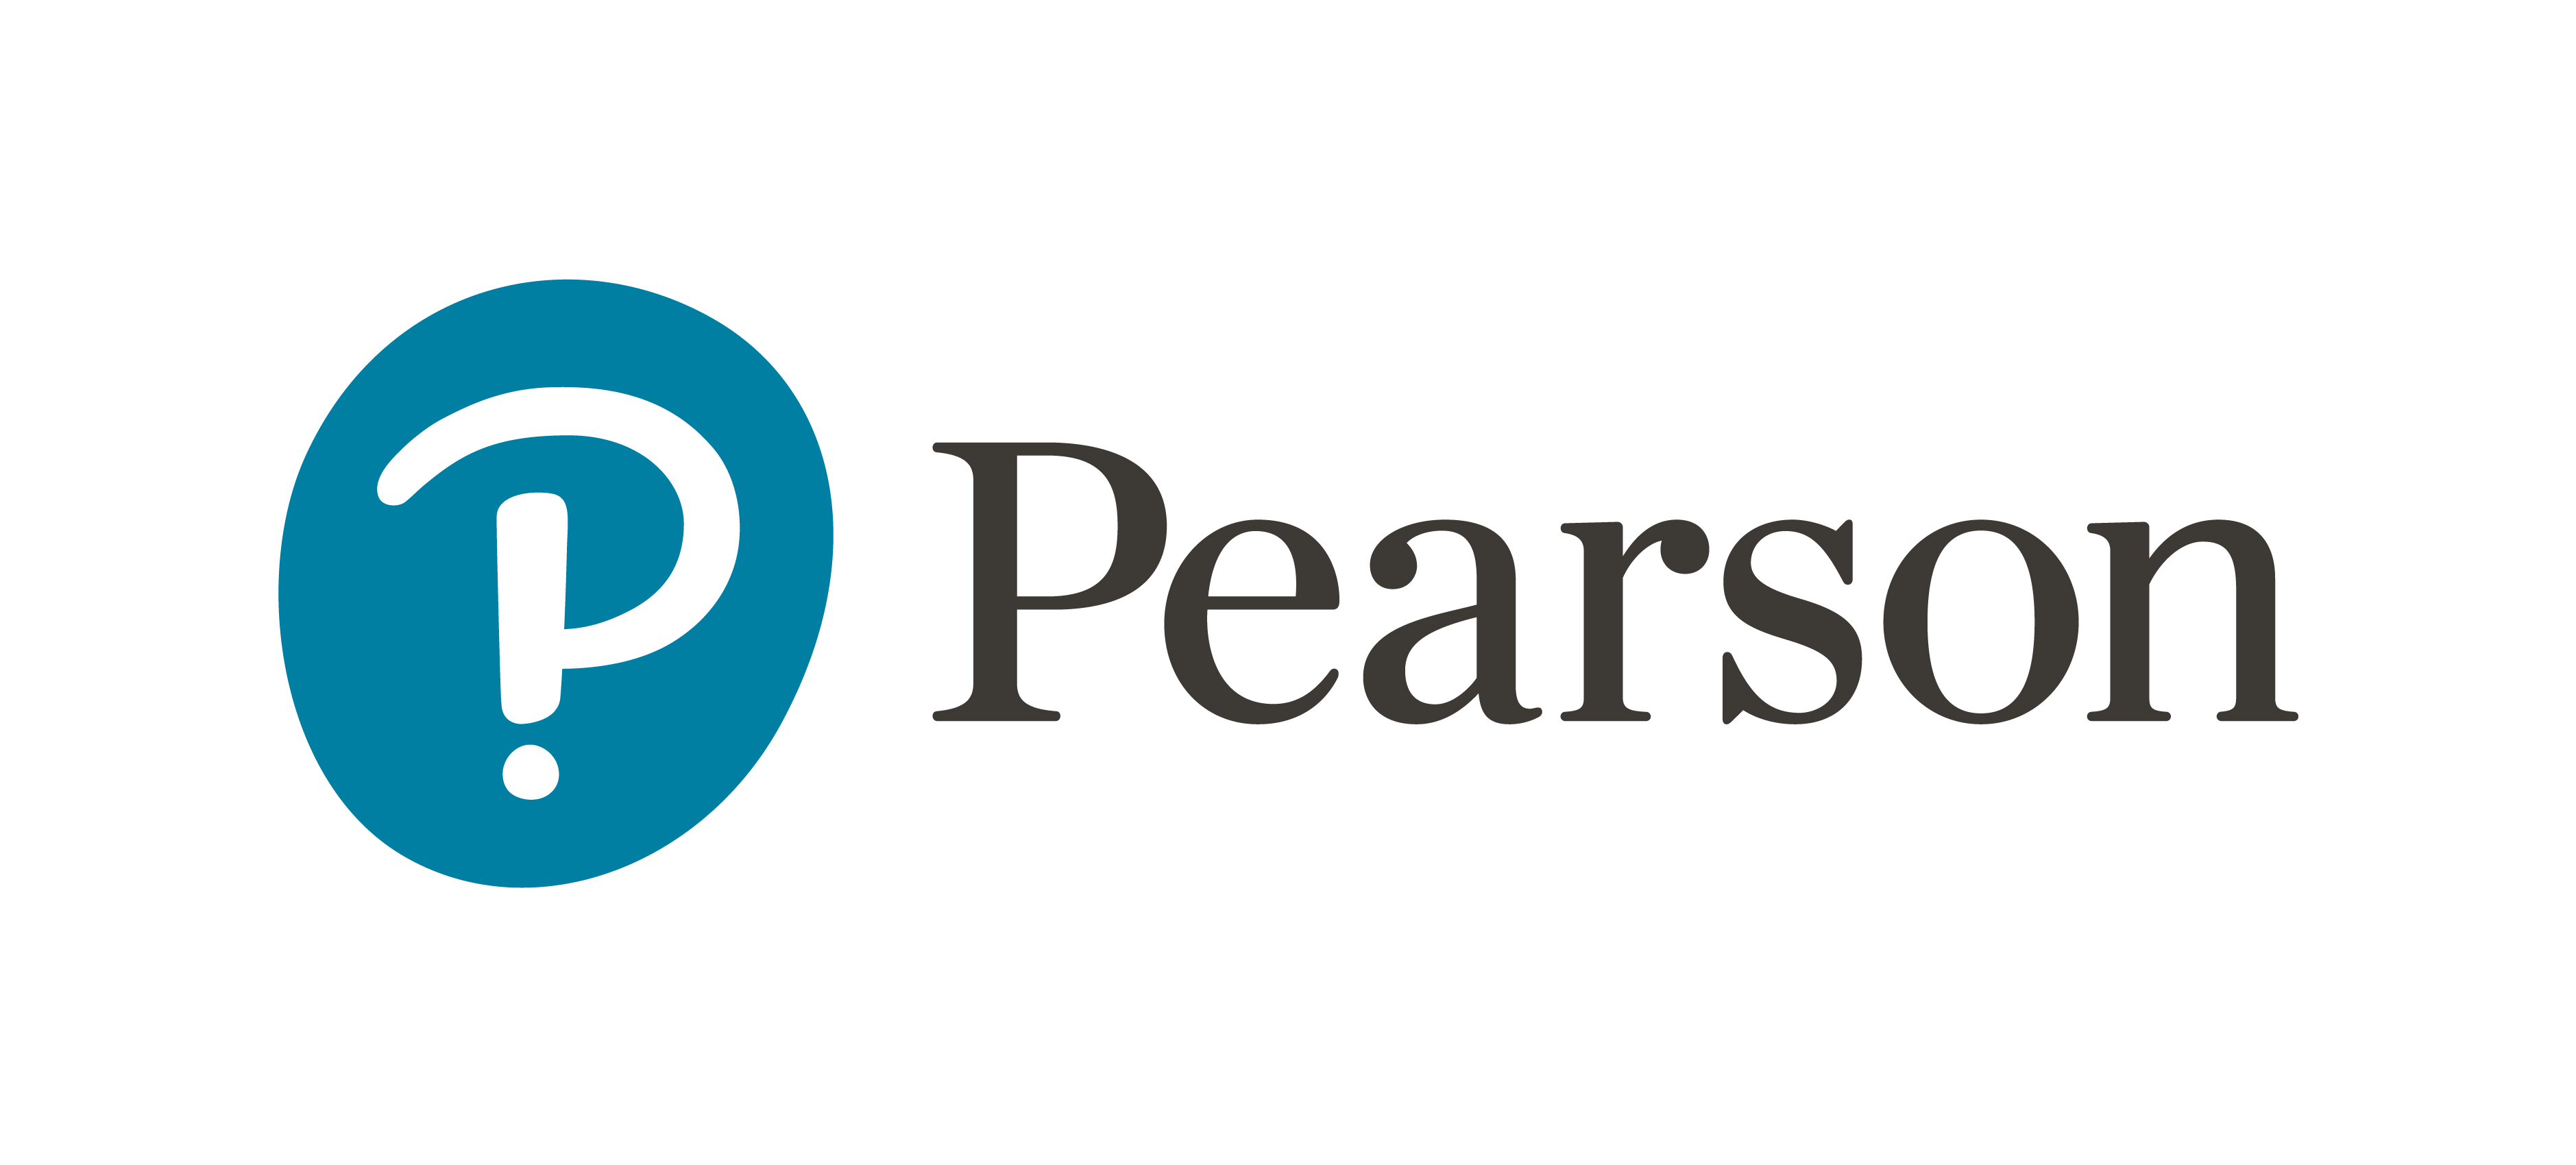 Pearson Learning Services